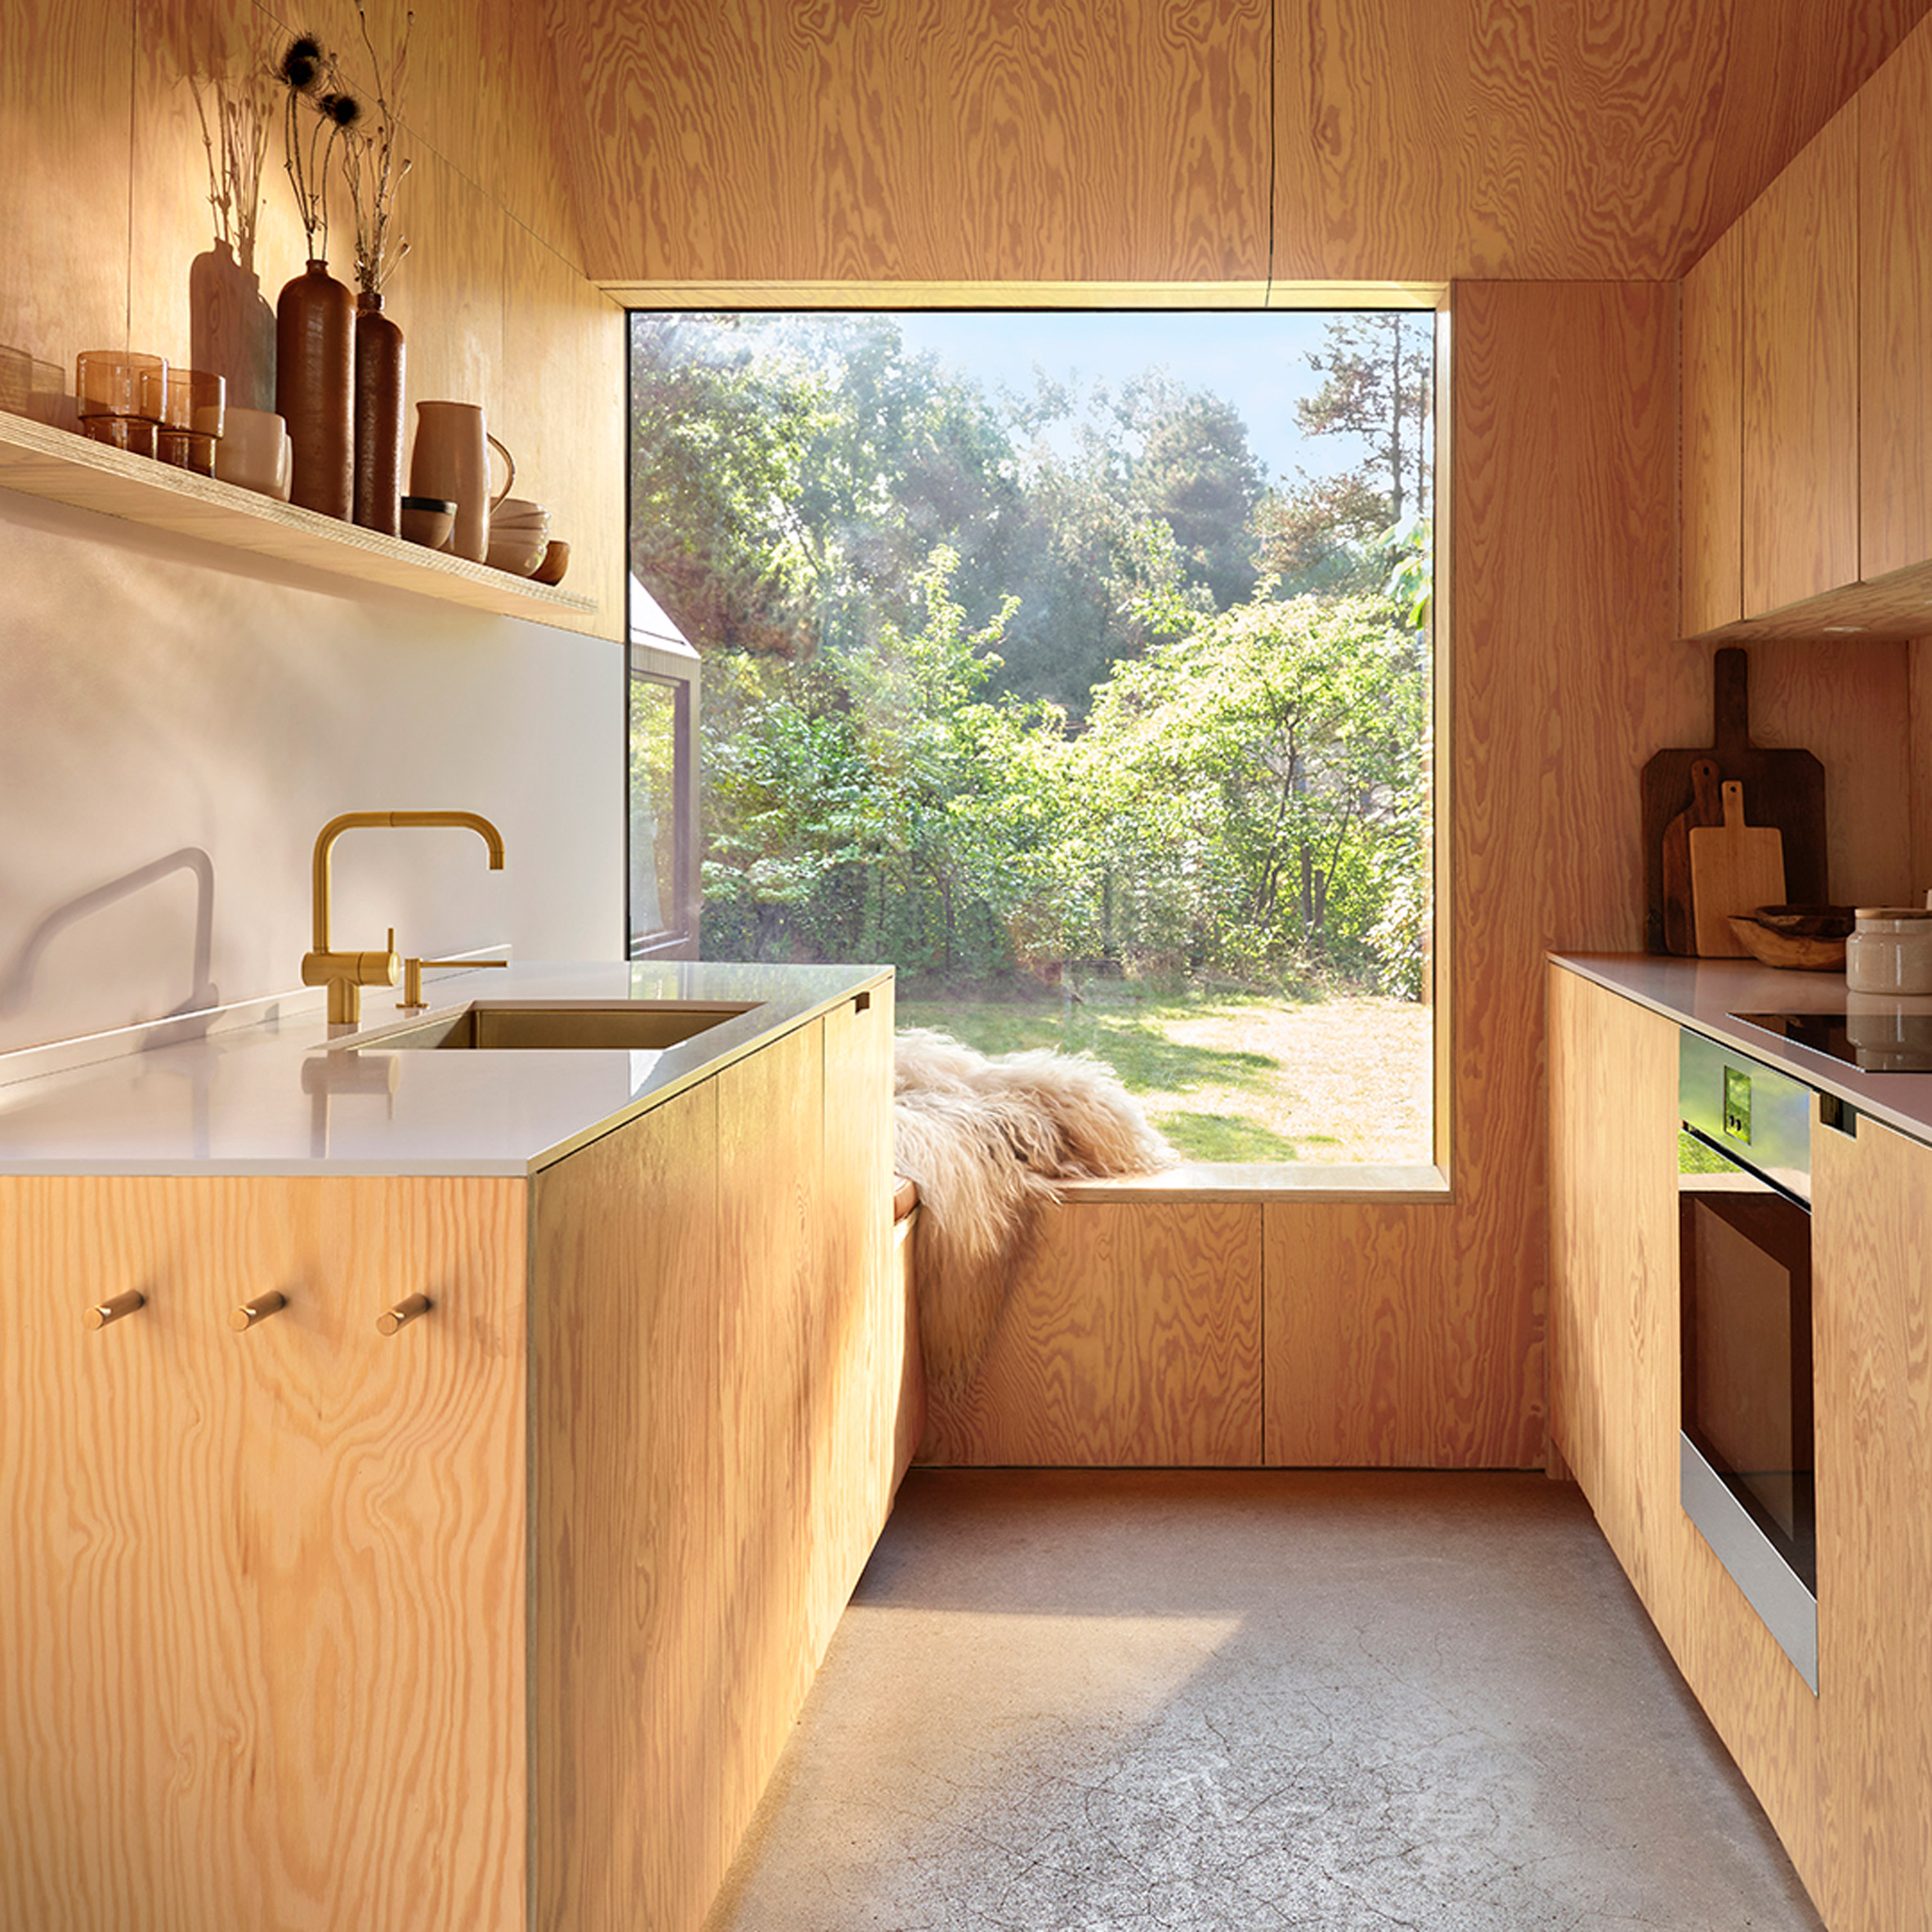 Vola's short film The Danish Sommerhus – Inspiring Life features its brushed-gold tap finish